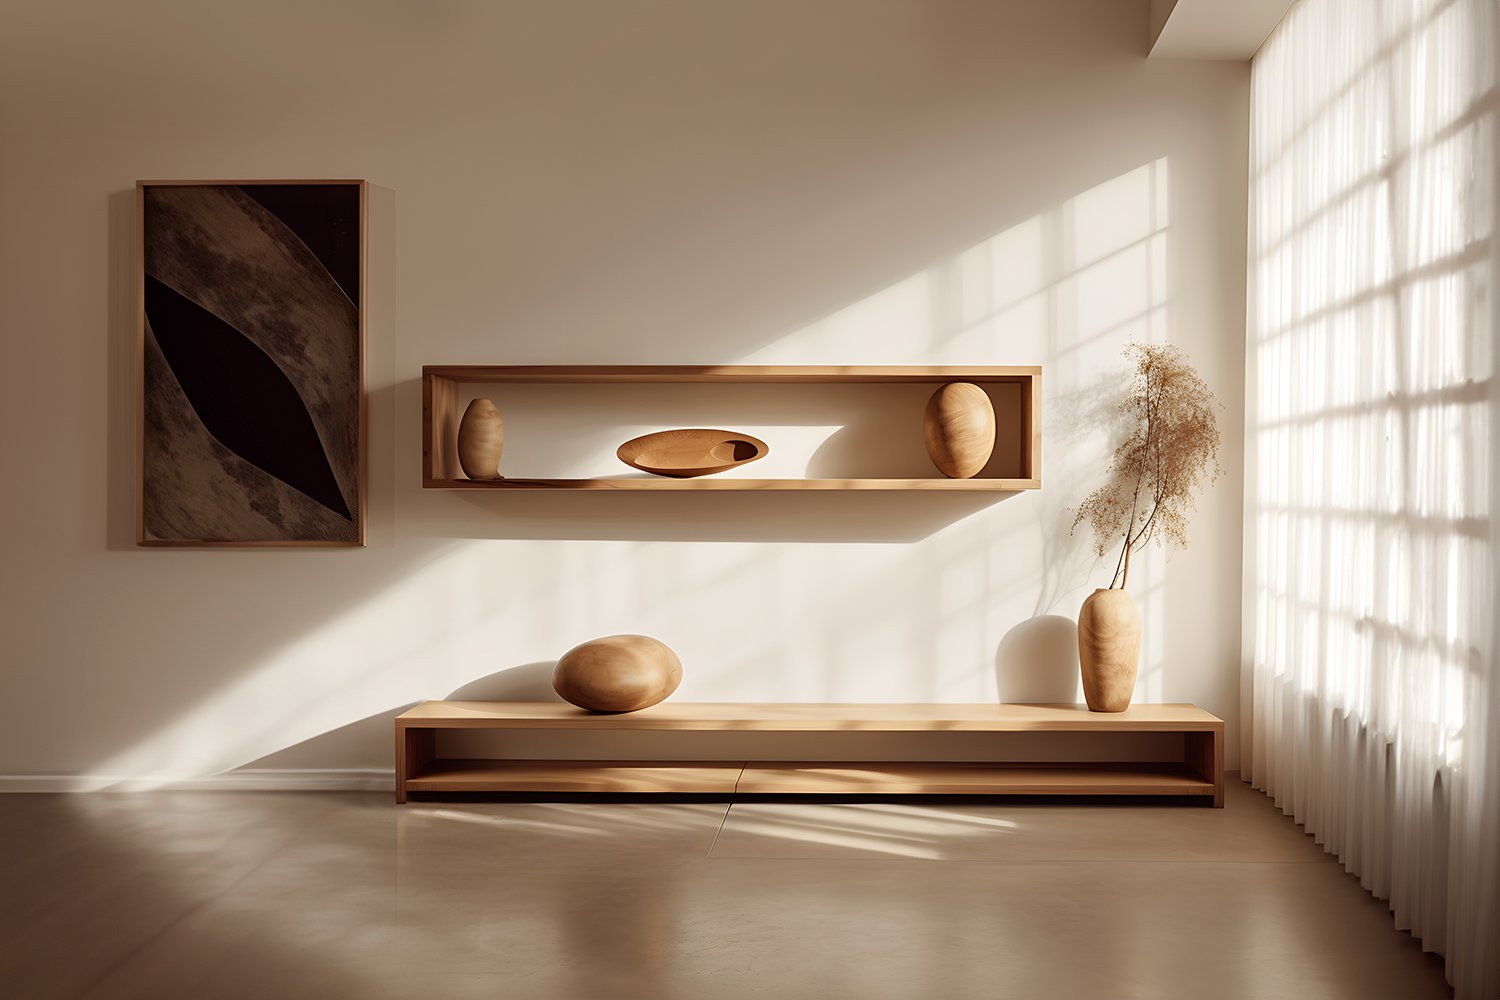 Large Rectangular Floating Shelf with One Sculptural Wooden Pebble Accent, Sereno by Joel Escalon — 3.jpg